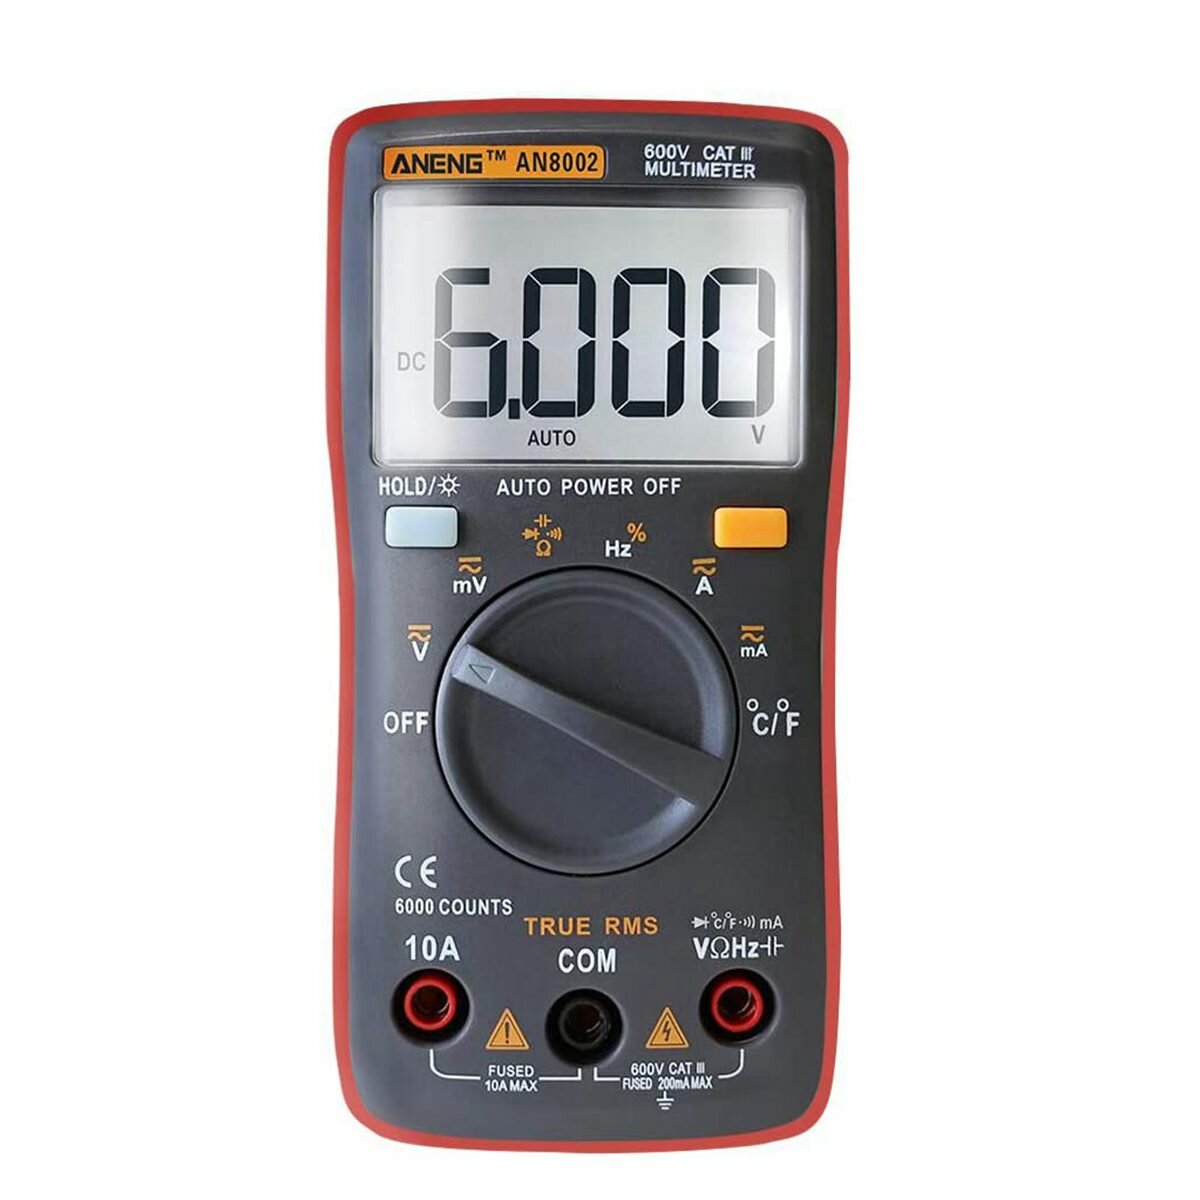 ANENG AN8002 Digital True RMS 6000 Counts Multimeter AC/DC Current Voltage Frequency Resistance Temperature Tester